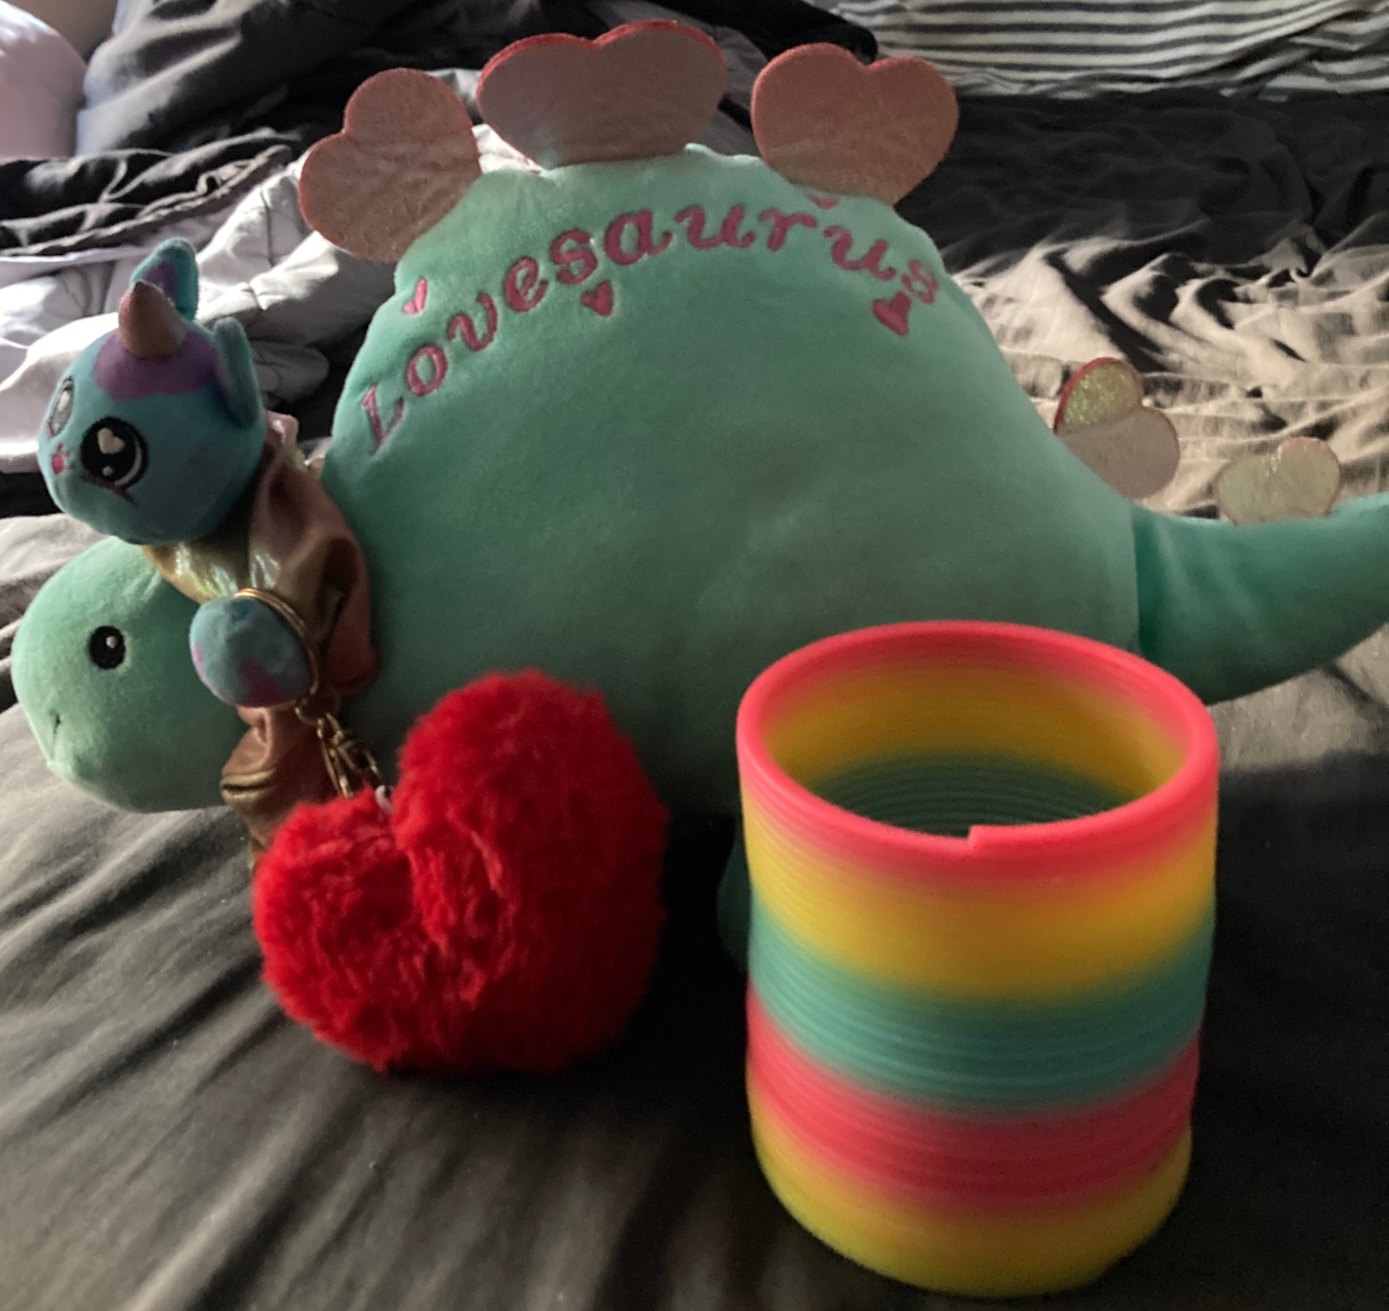 Small blue dinosaur, heart shaped body, scrunchy around neck. With Slinky and loveheart keyring.